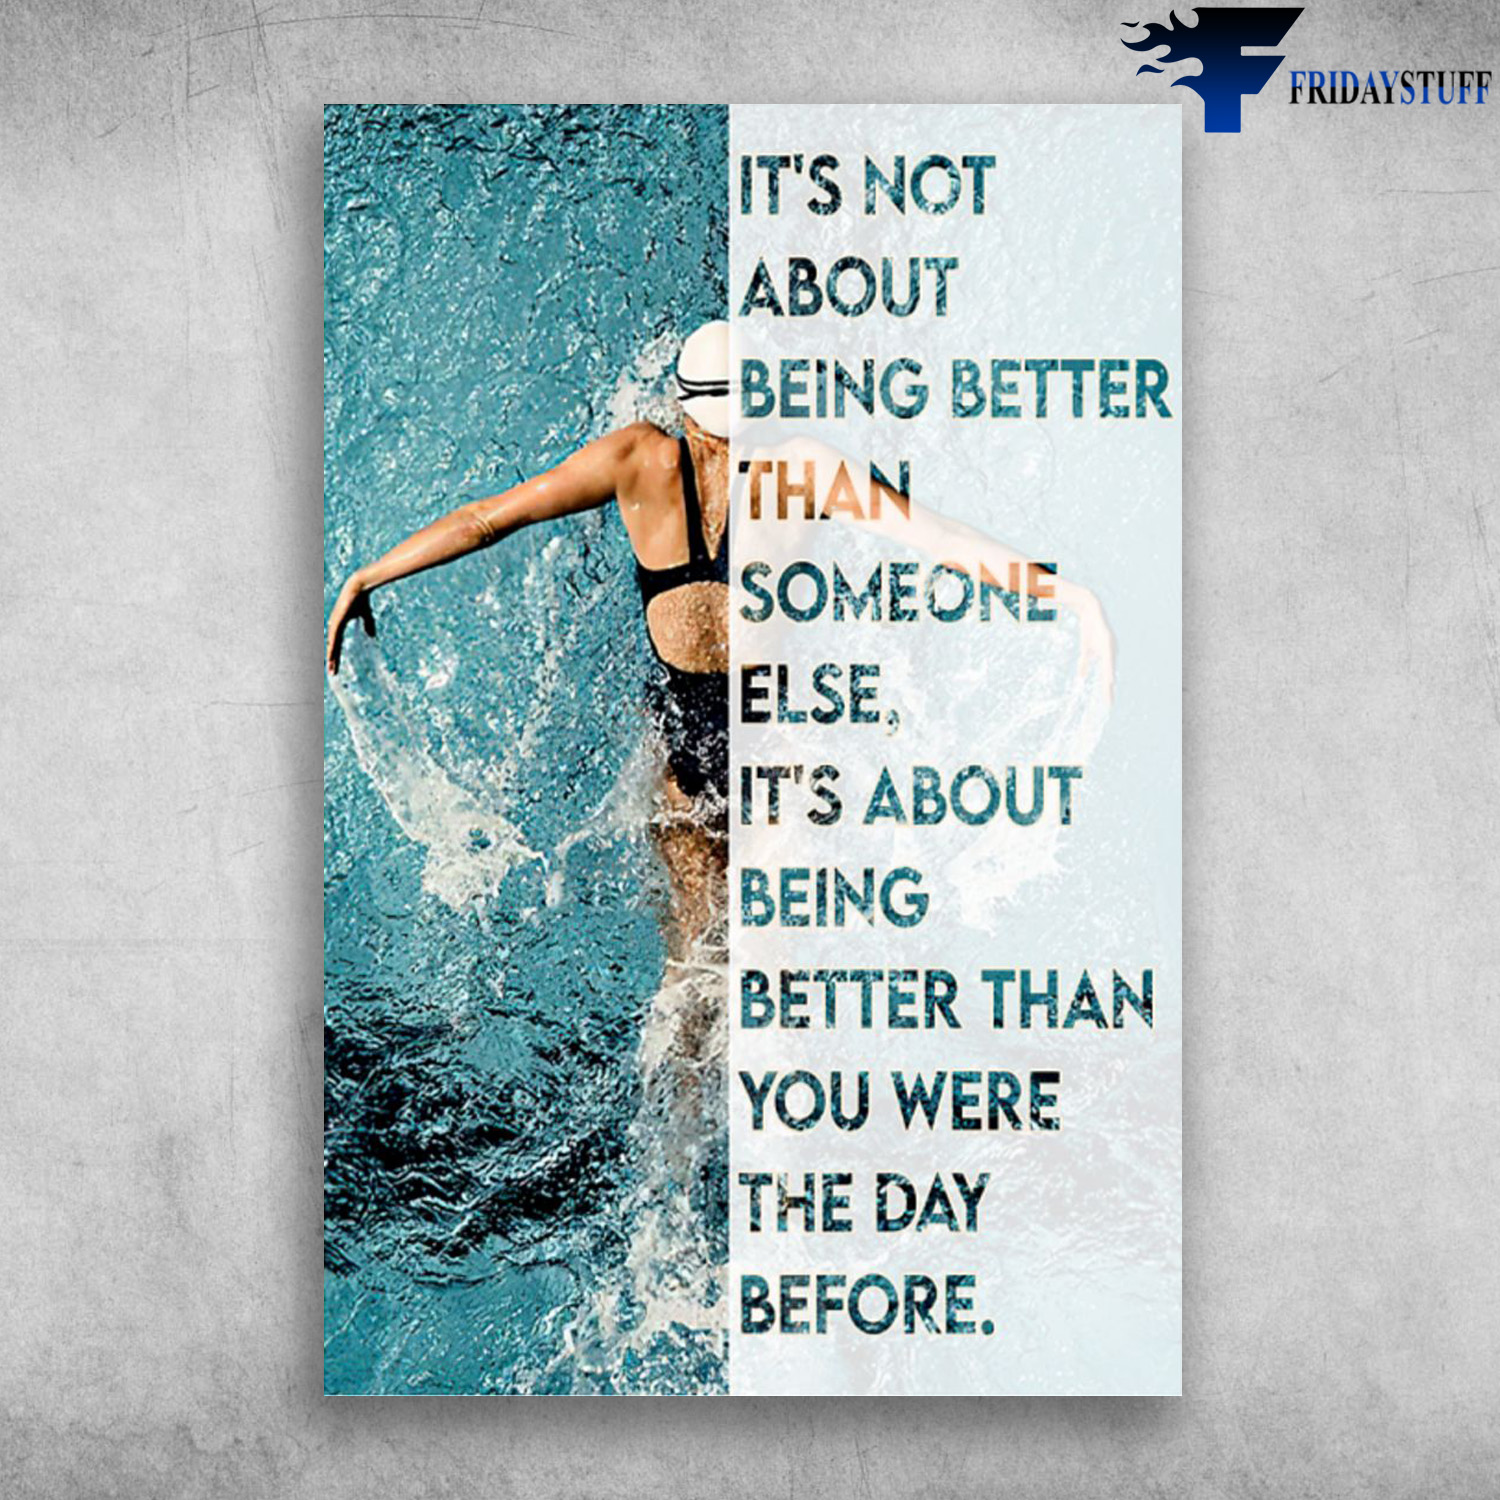 Swimming Athlete - It's Not About Being Better Than Someone Else, It's About Being Better Than You Were The Day Before